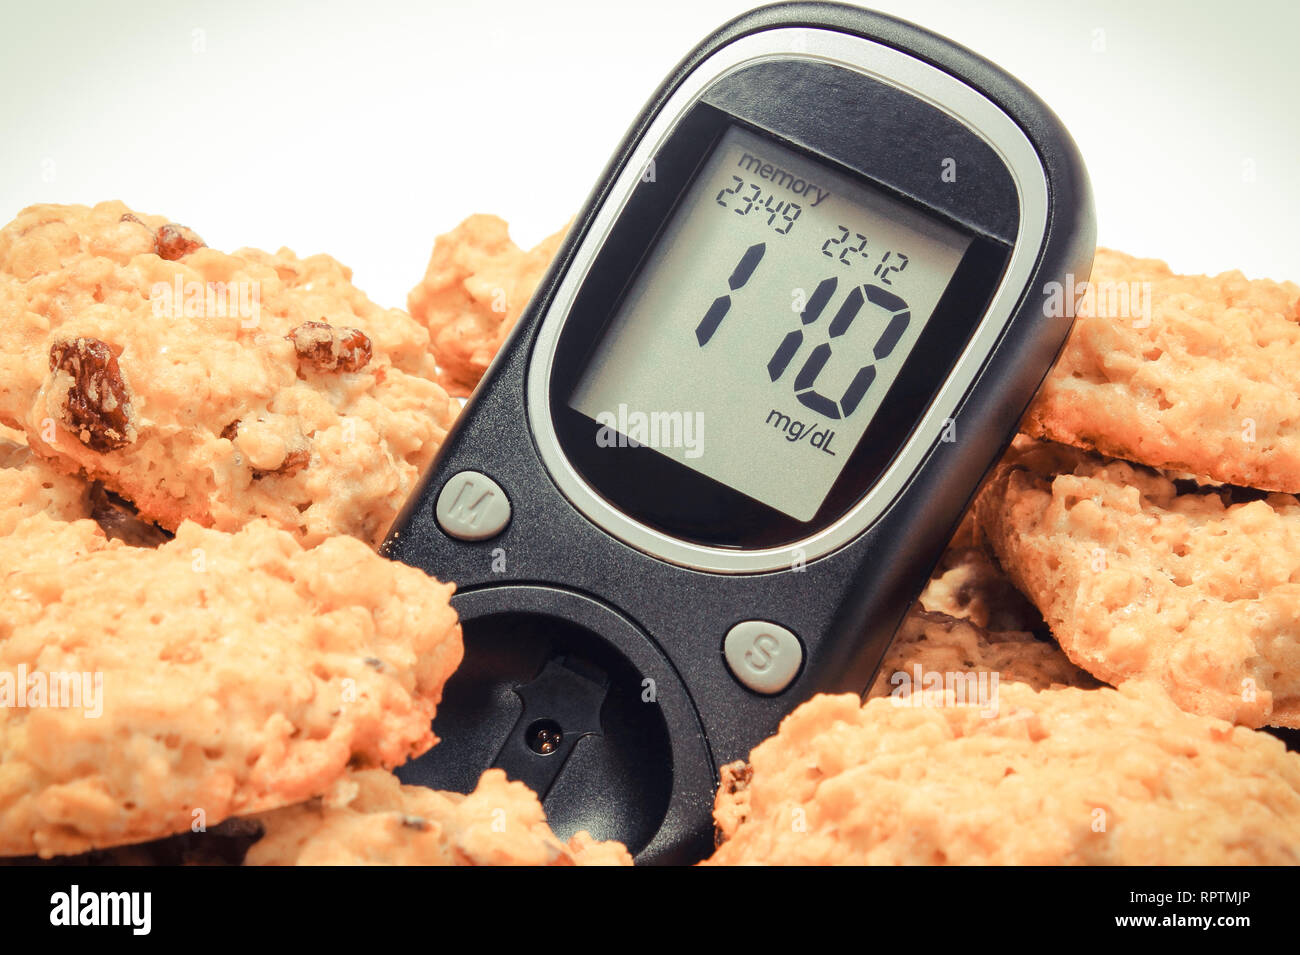 Glucose Meter With Result Of Measurement Sugar Level And Oatmeal Cookies Concept Of Diabetes And Healthy Nutrition Stock Photo Alamy